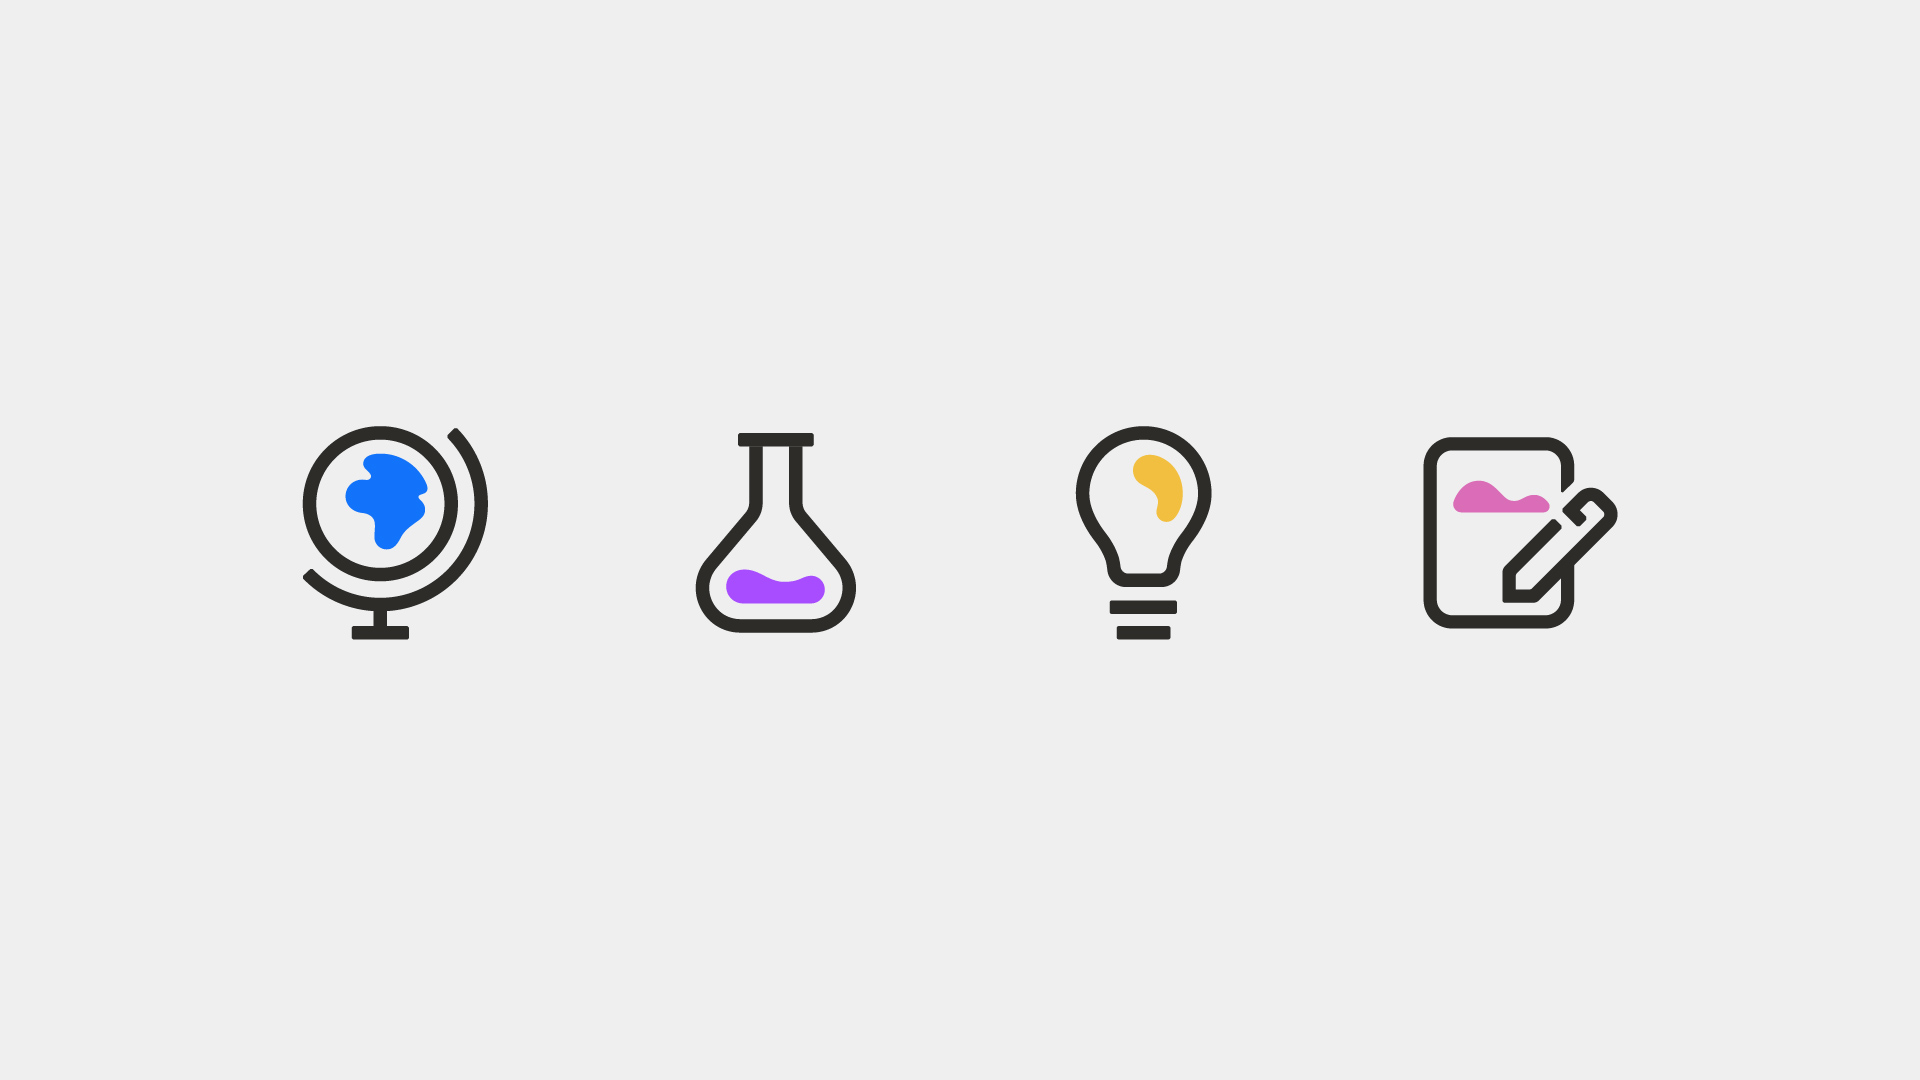 Colorful Newsela icon designs for social studies, science, learning, and writing.